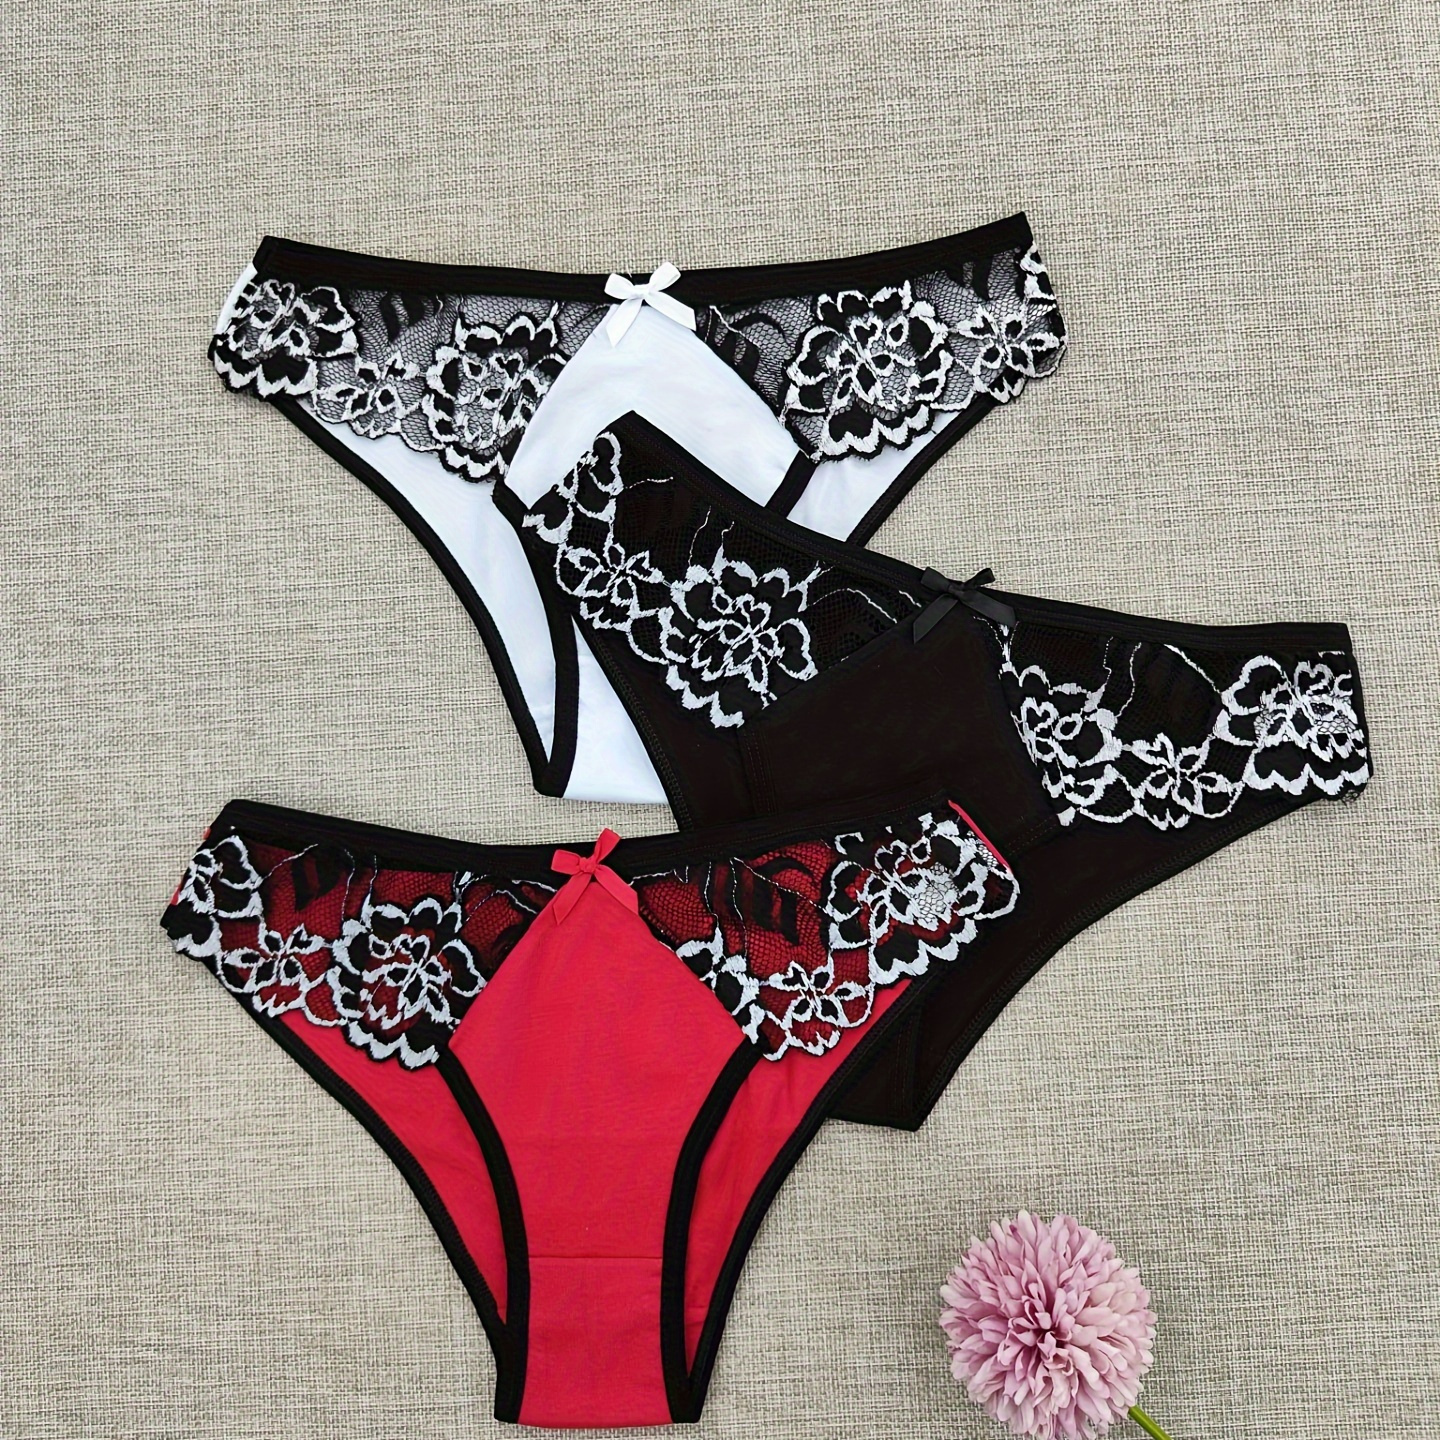 

3pcs Contrast Binding Bow Decor Floral Embroidery Cotton Low Waist Briefs, Elegant Comfy Breathable Stretchy Intimates Panties, Women's Lingerie & Underwear